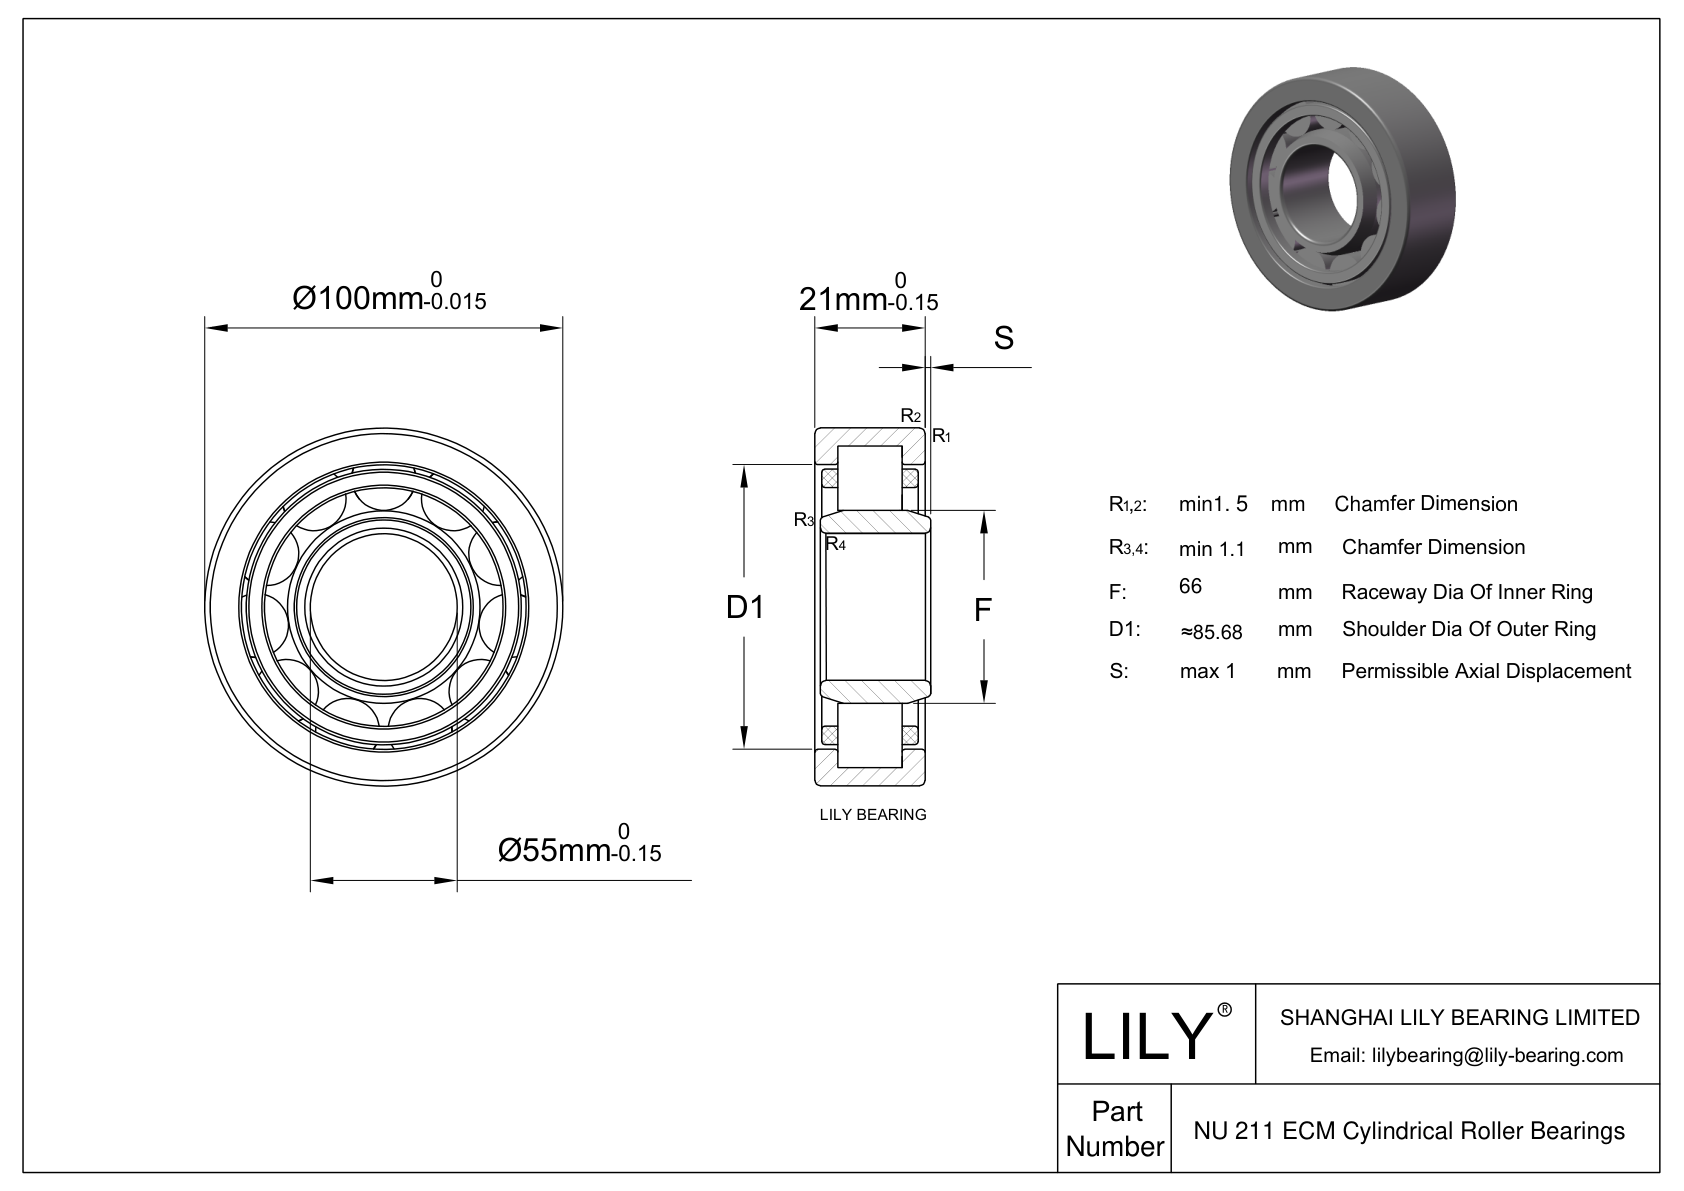 NU 211 ECM/C3VL0241 Ceramic Coated Cylindrical Roller Bearings cad drawing